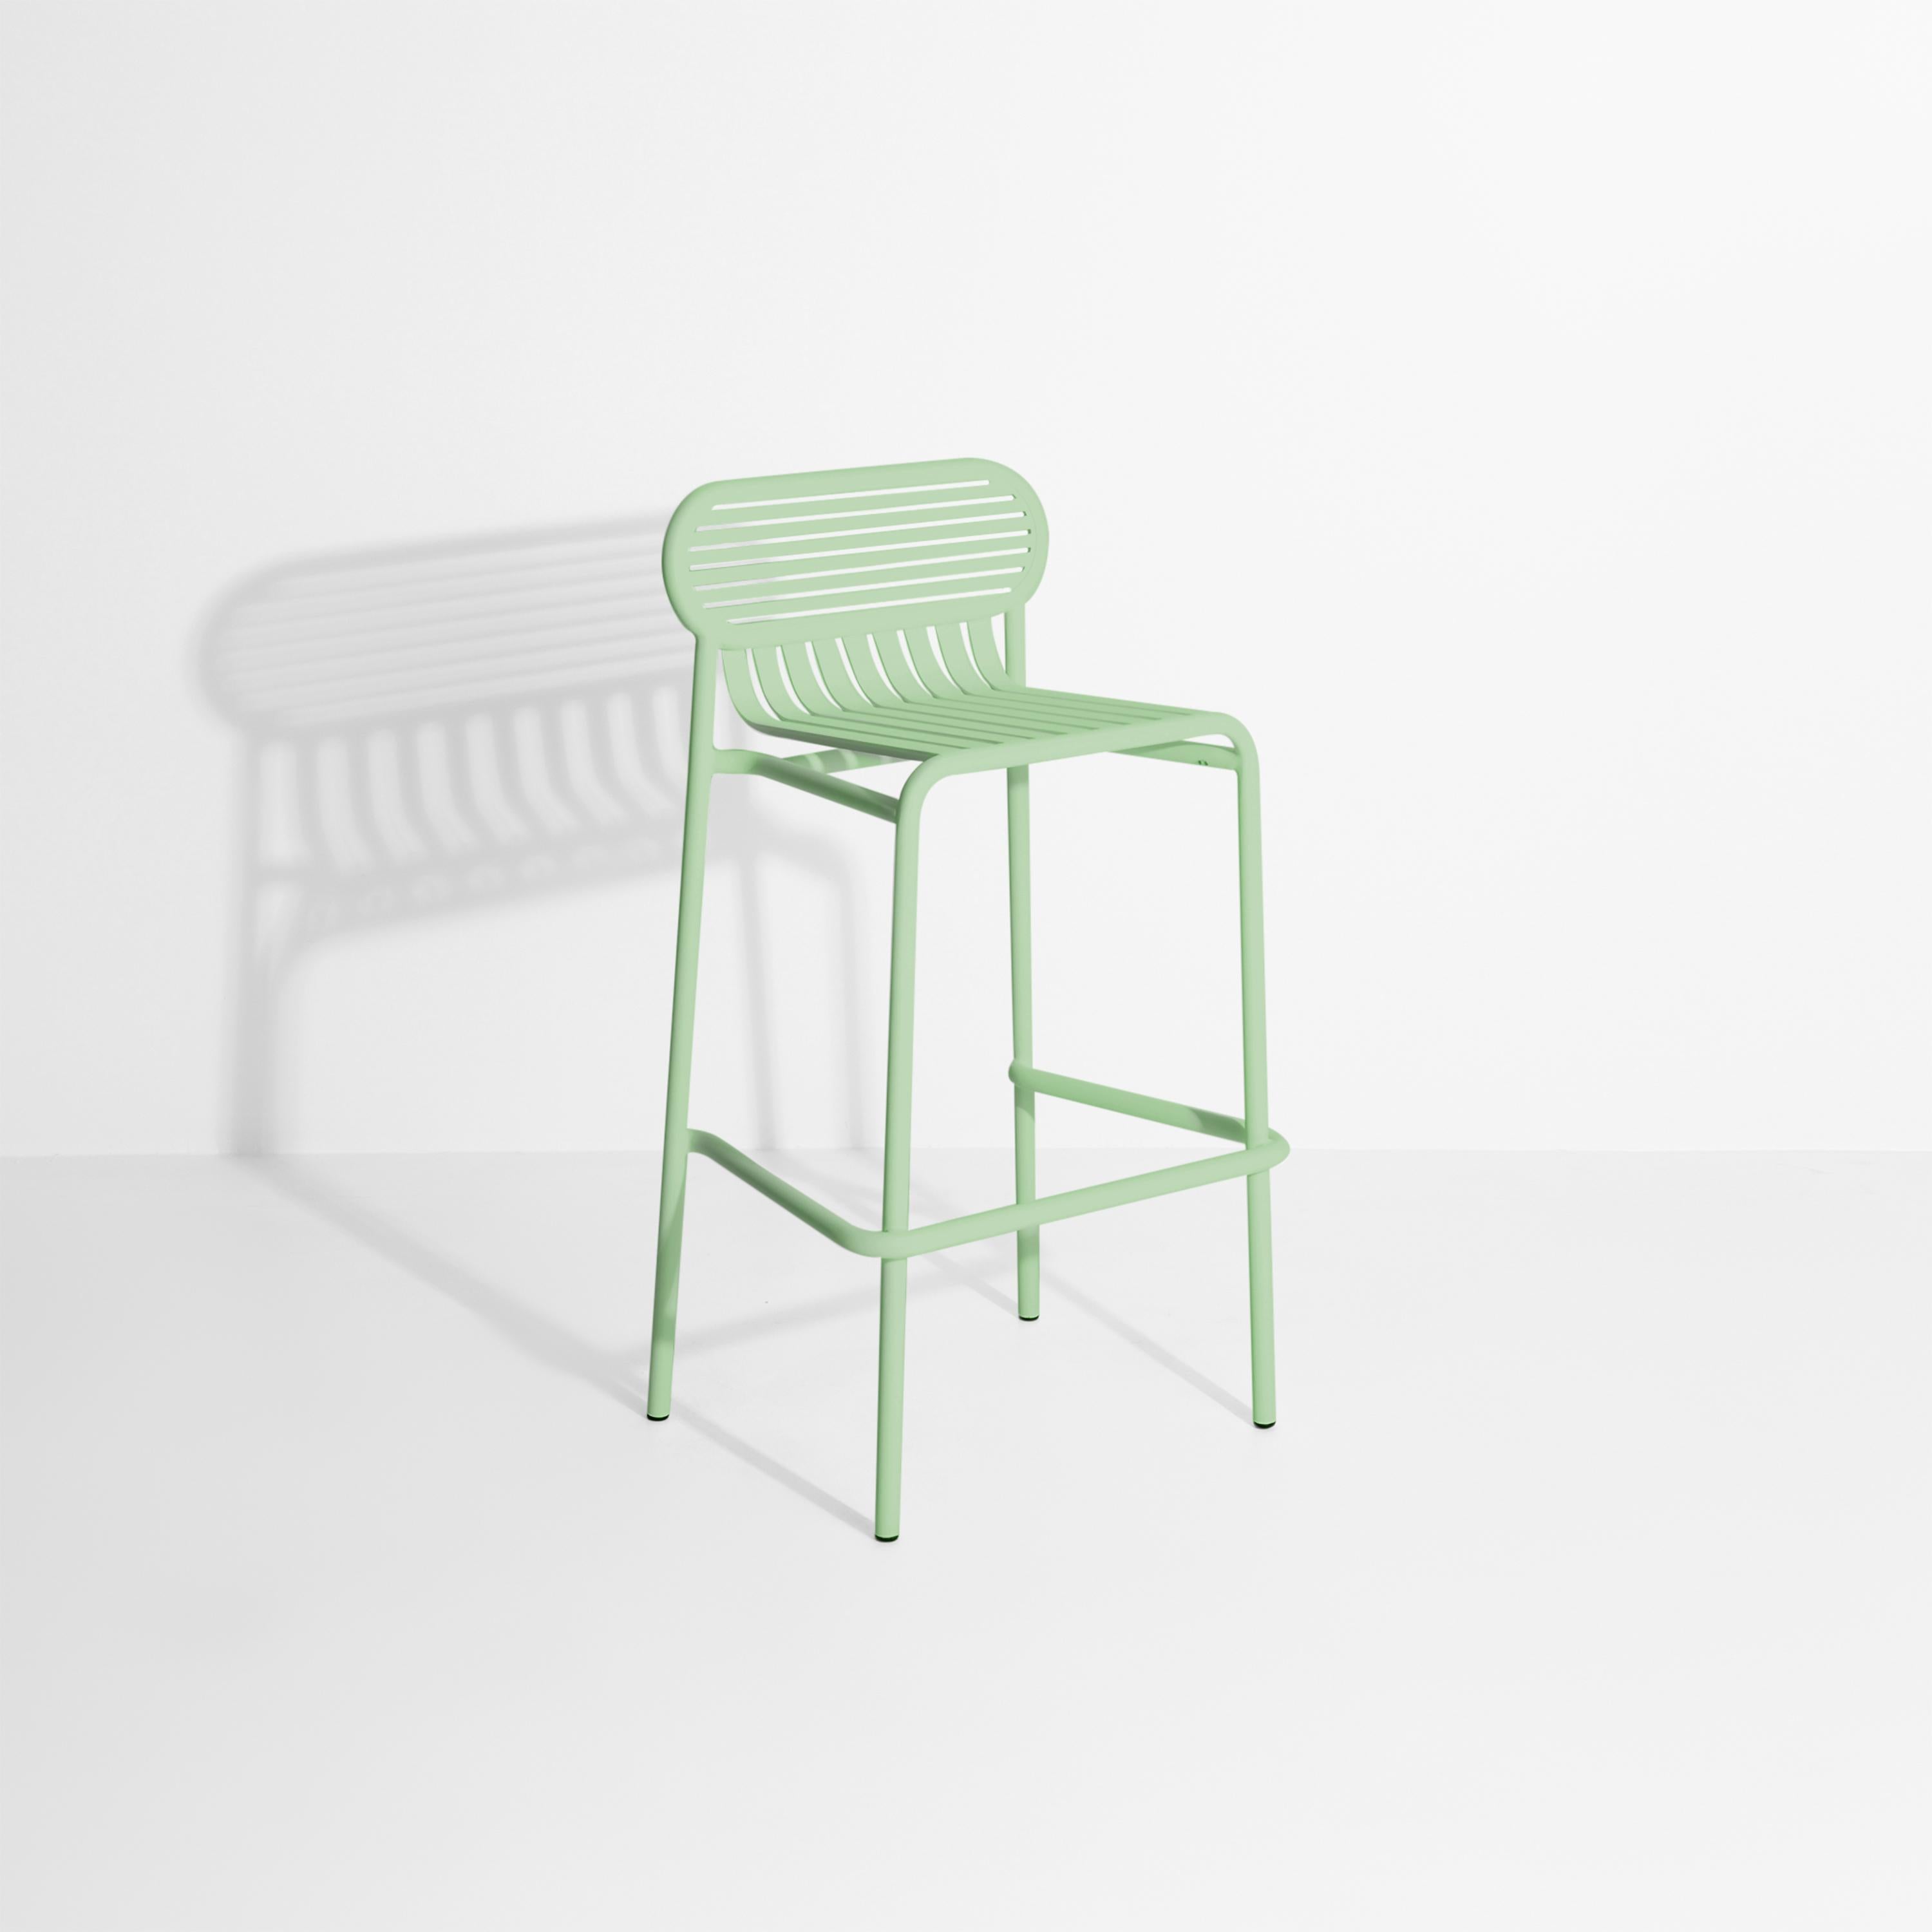 Petite Friture Week-End Bar Stool in Pastel Green Aluminium by Studio BrichetZiegler, 2017

The week-end collection is a full range of outdoor furniture, in aluminium grained epoxy paint, matt finish, that includes 18 functions and 8 colours for